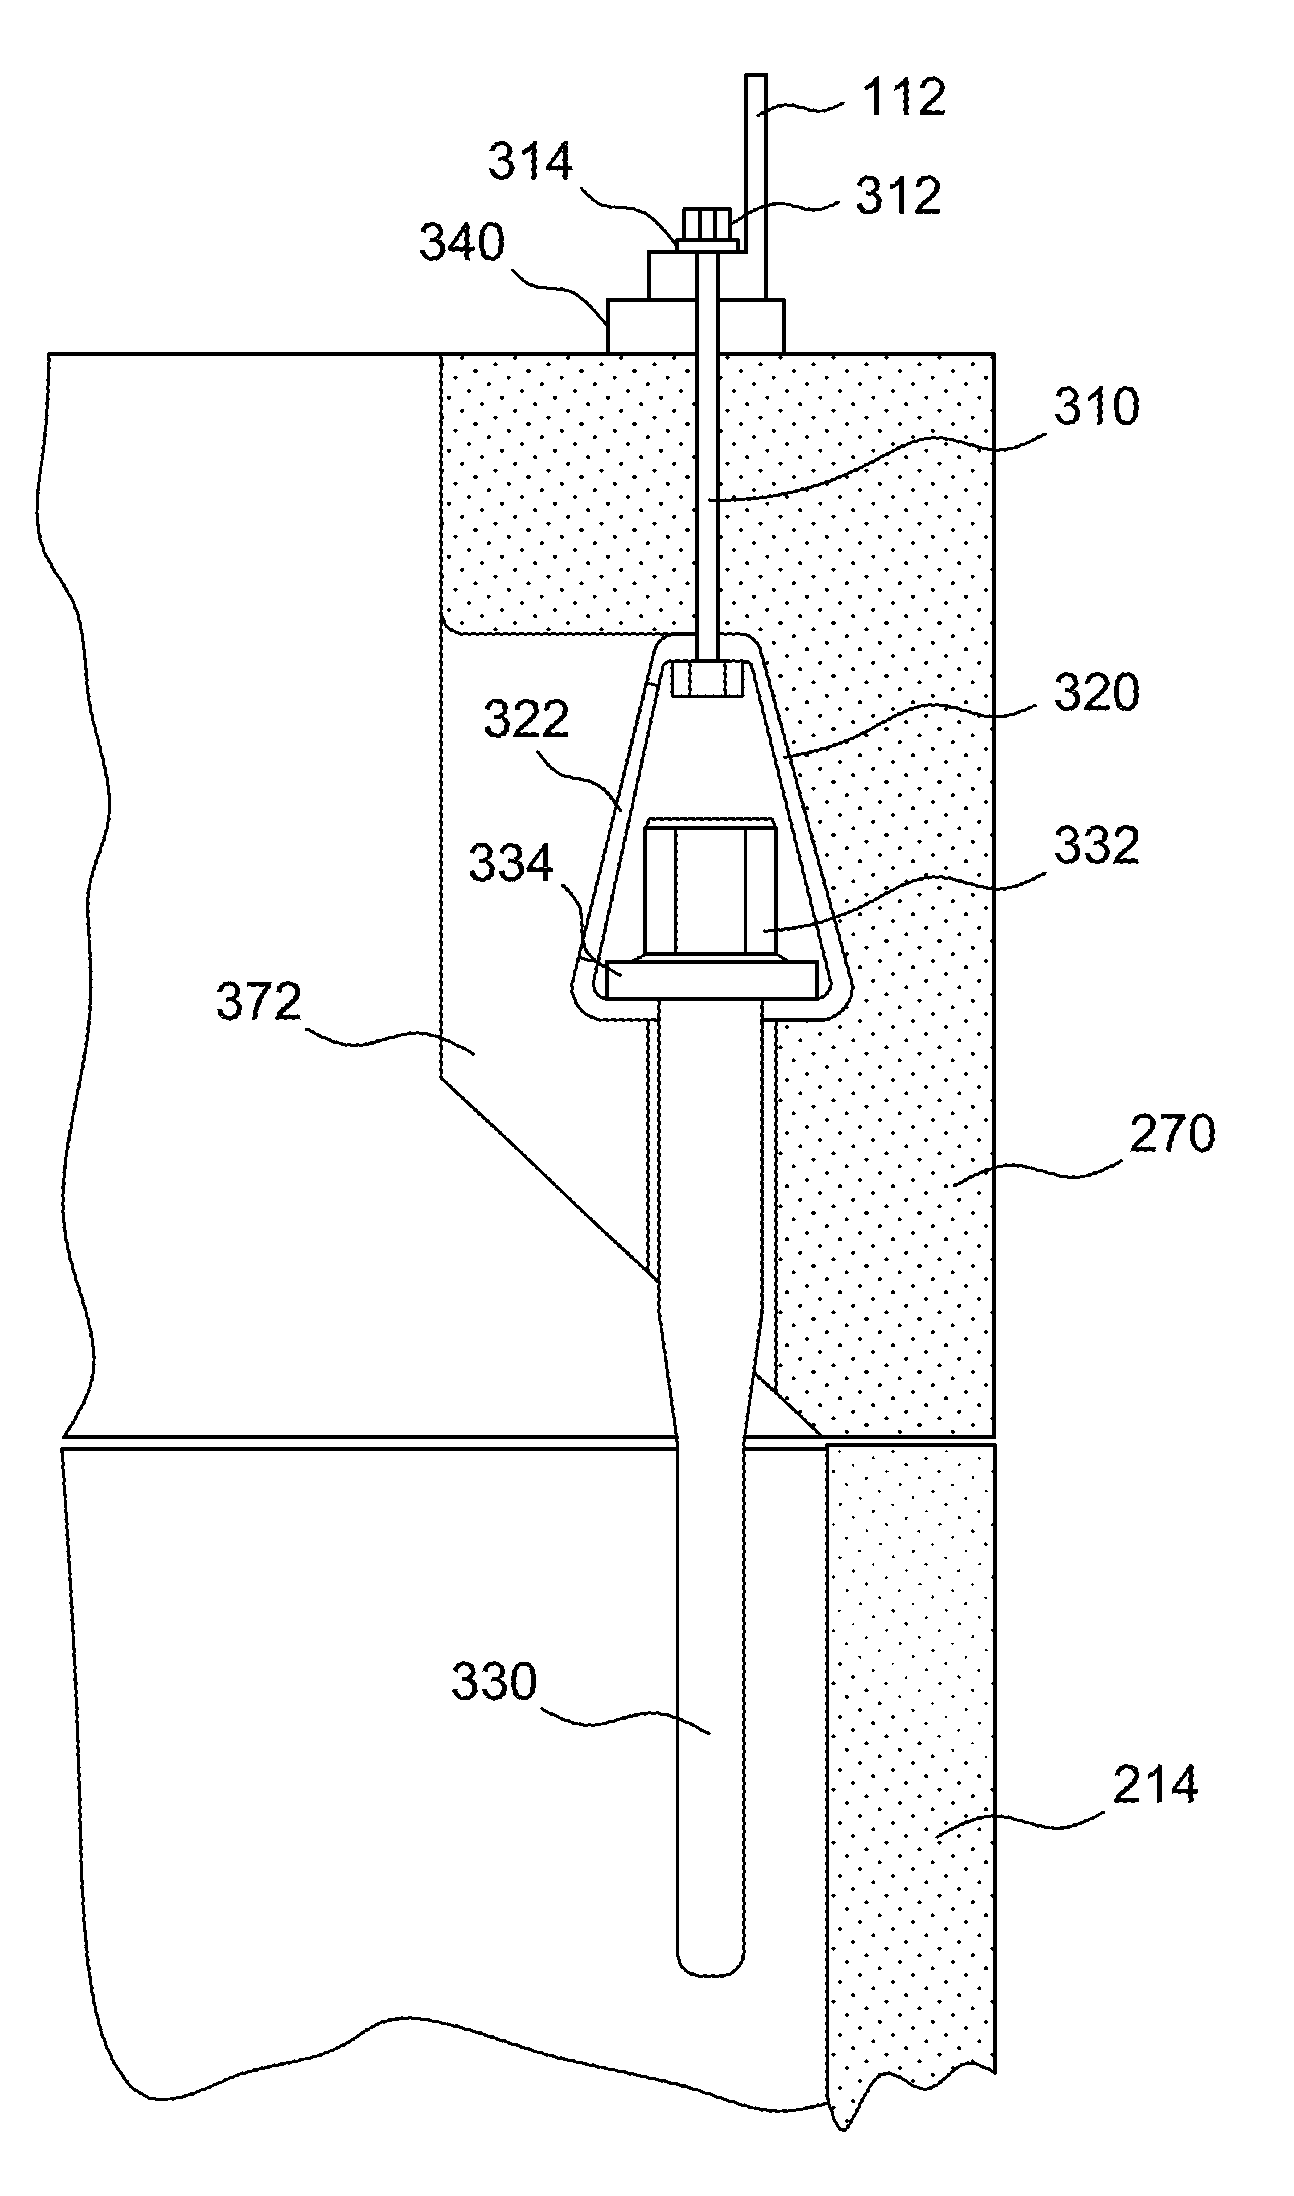 Tower with adapter section